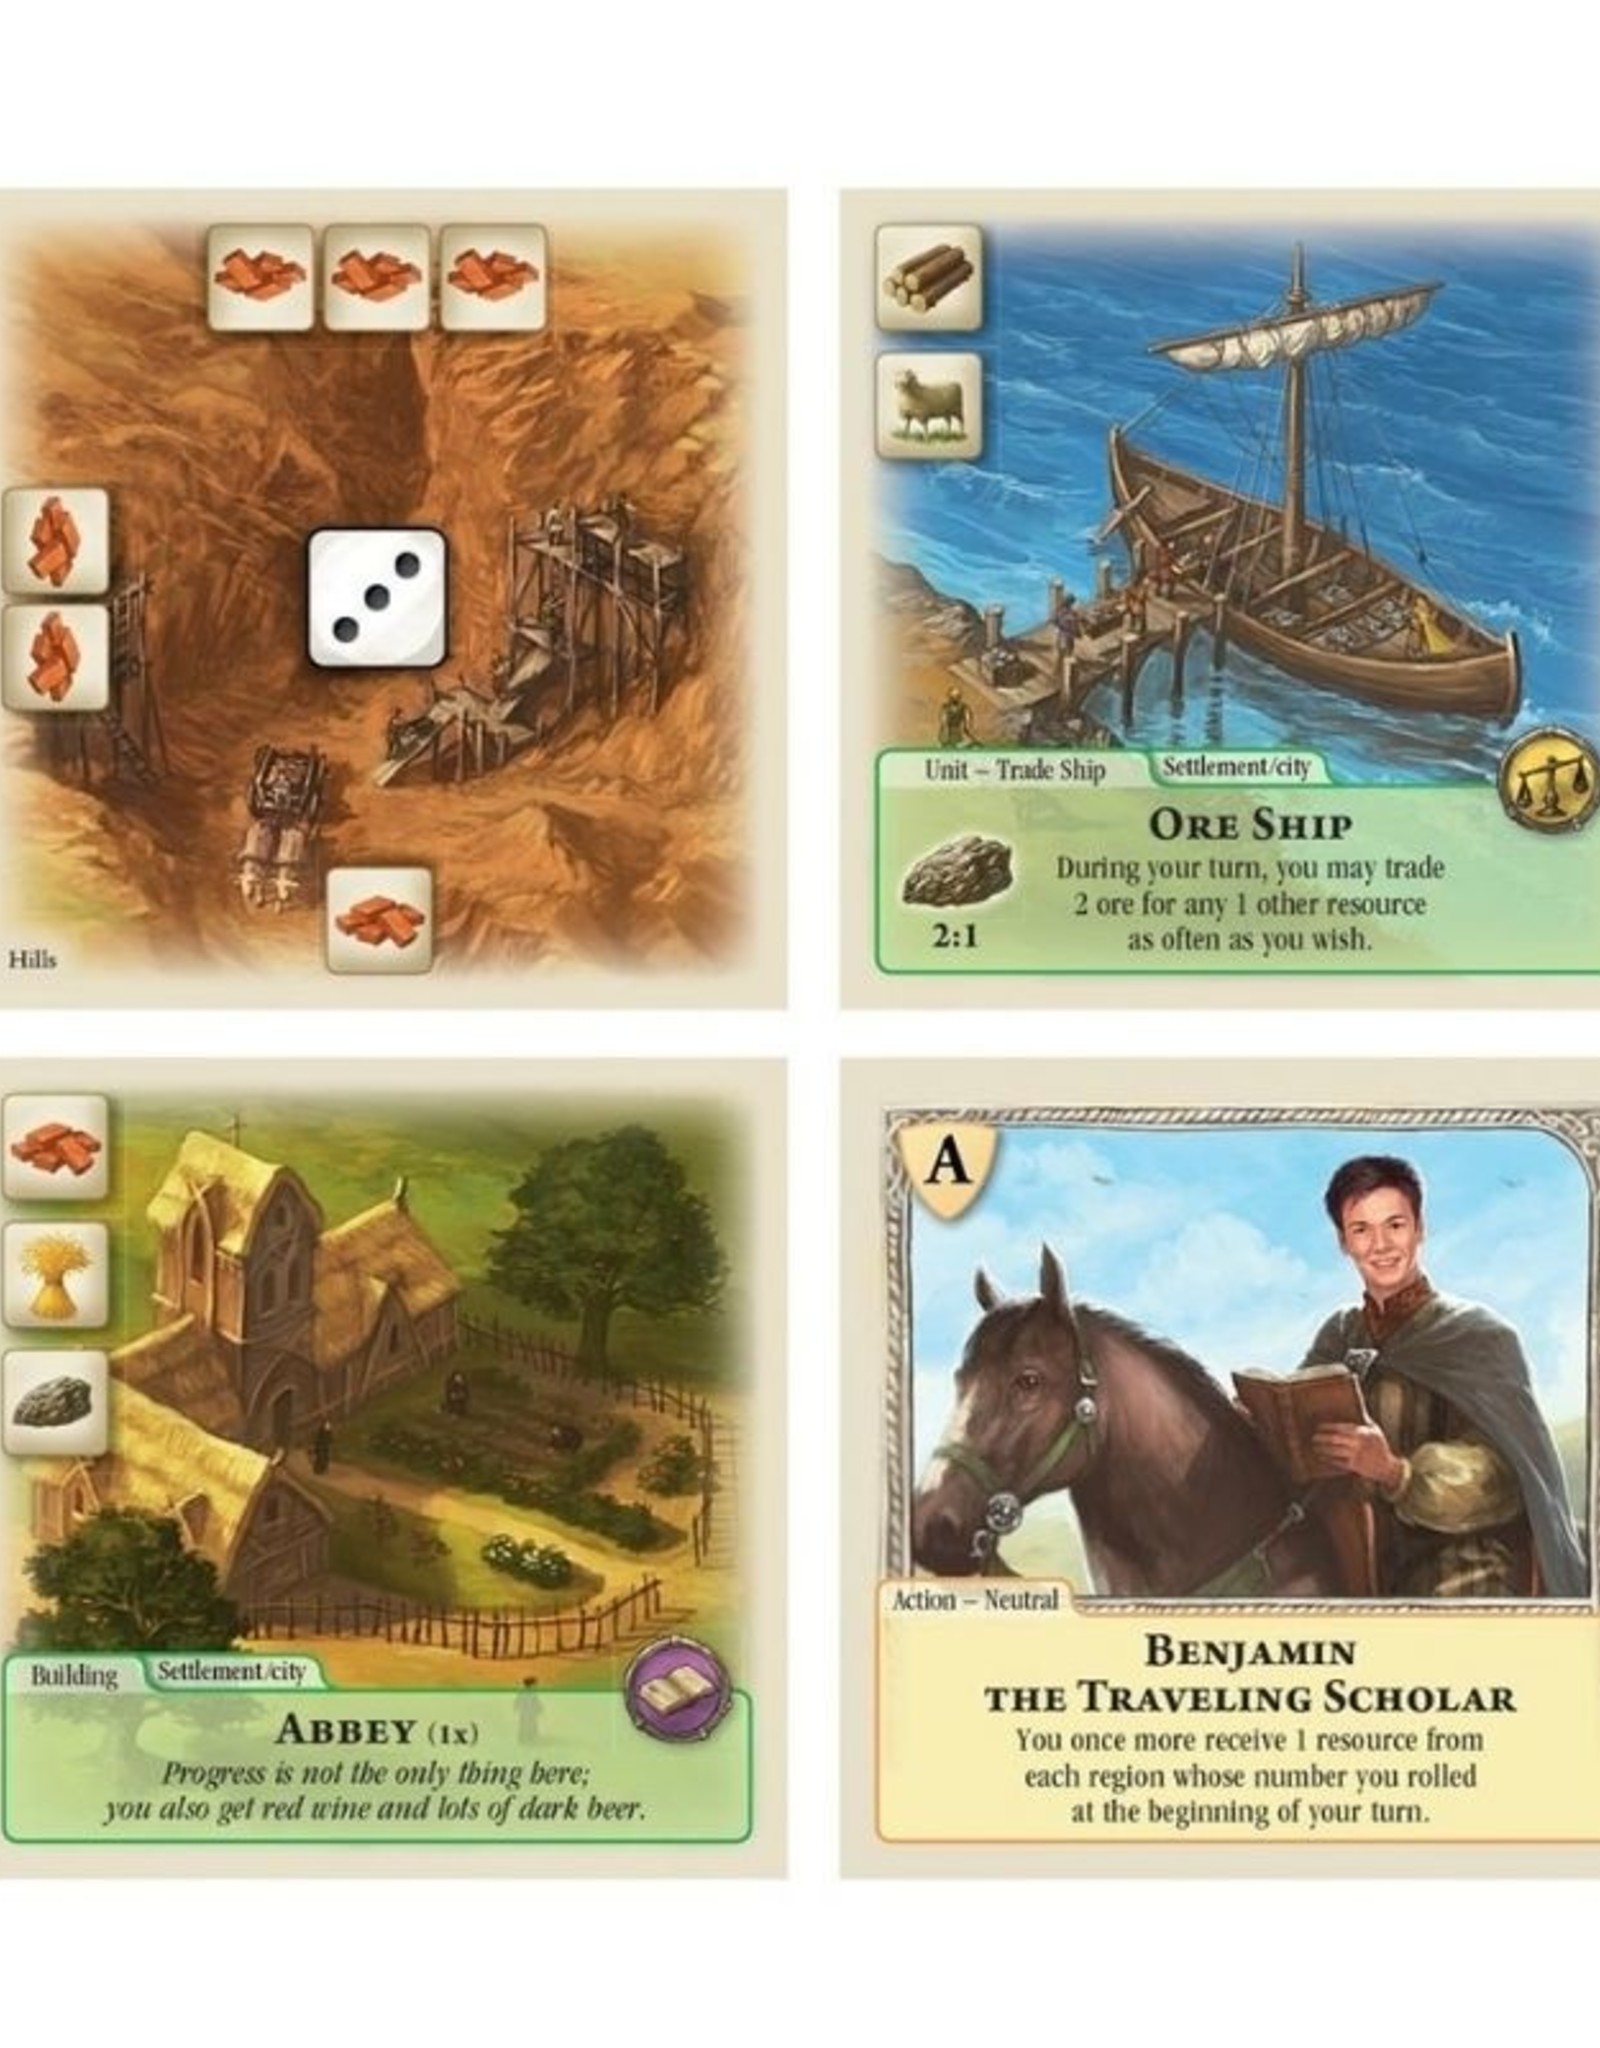 Rivals for Catan (Deluxe)